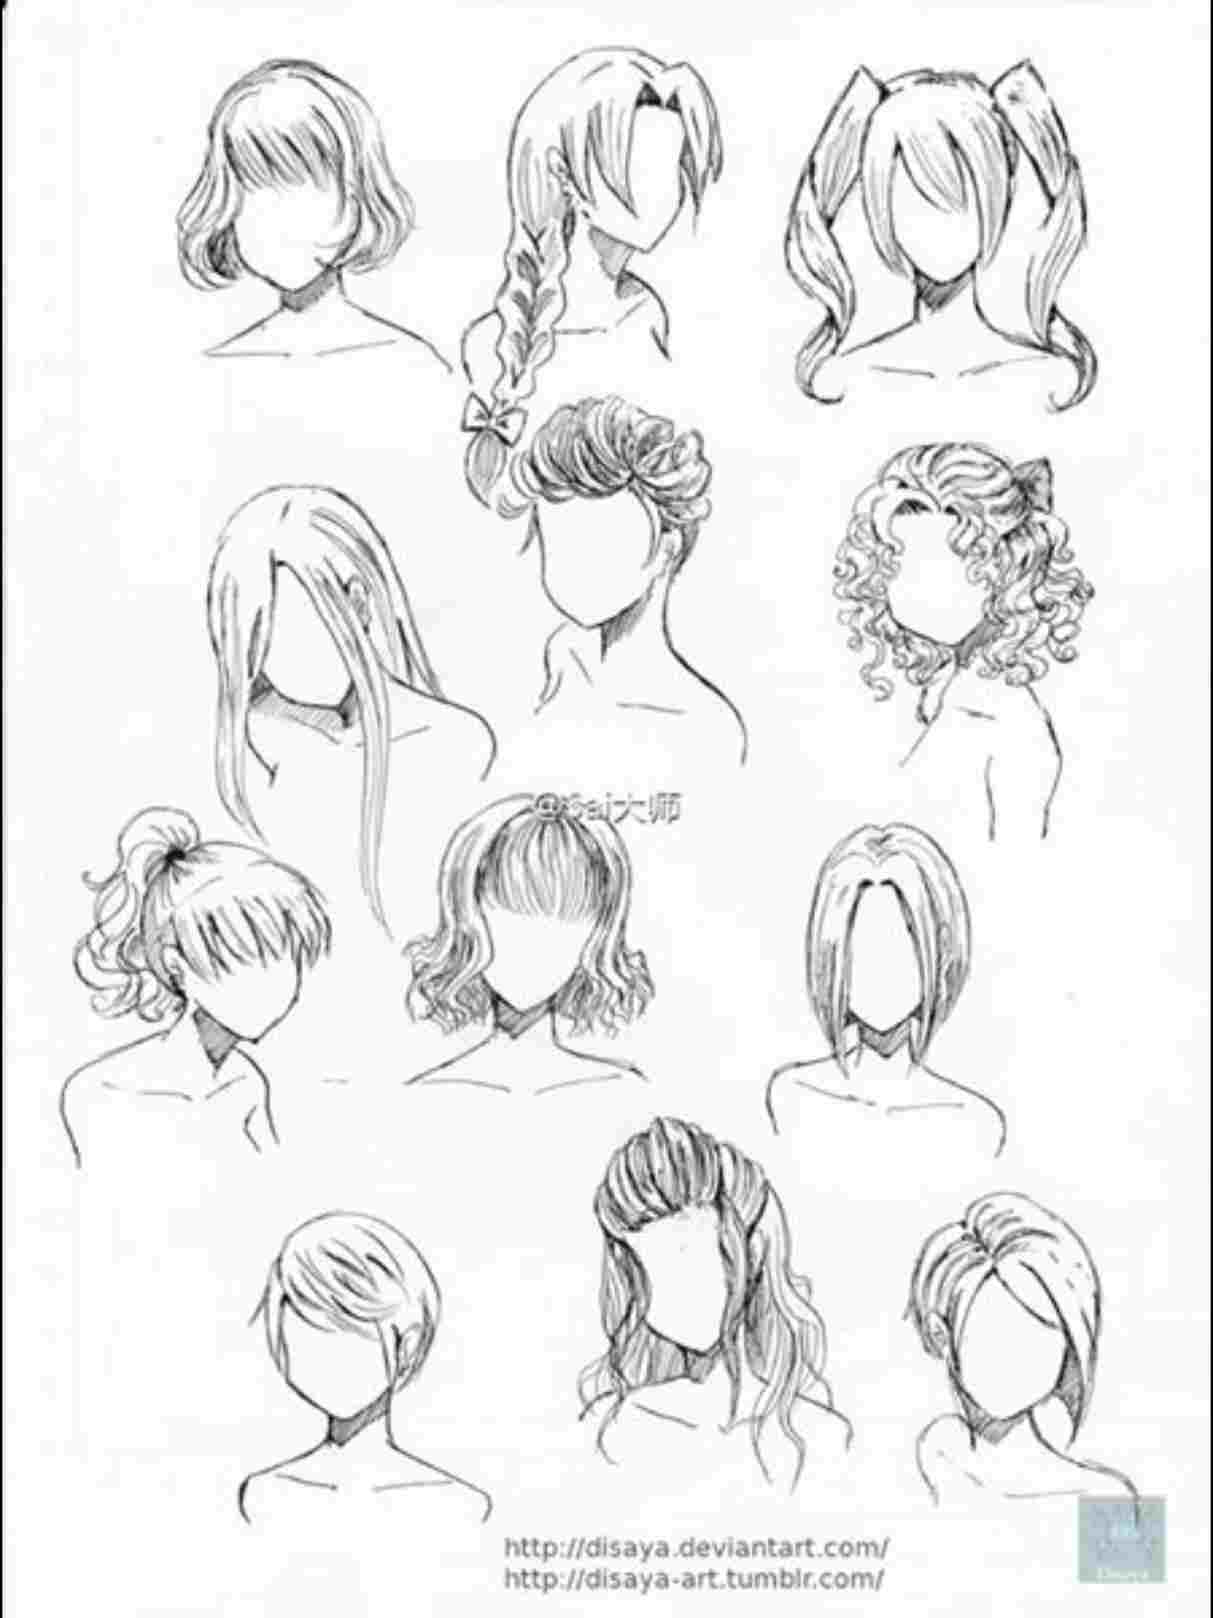  Short Hairstyles Drawing Reference for Men Haircut